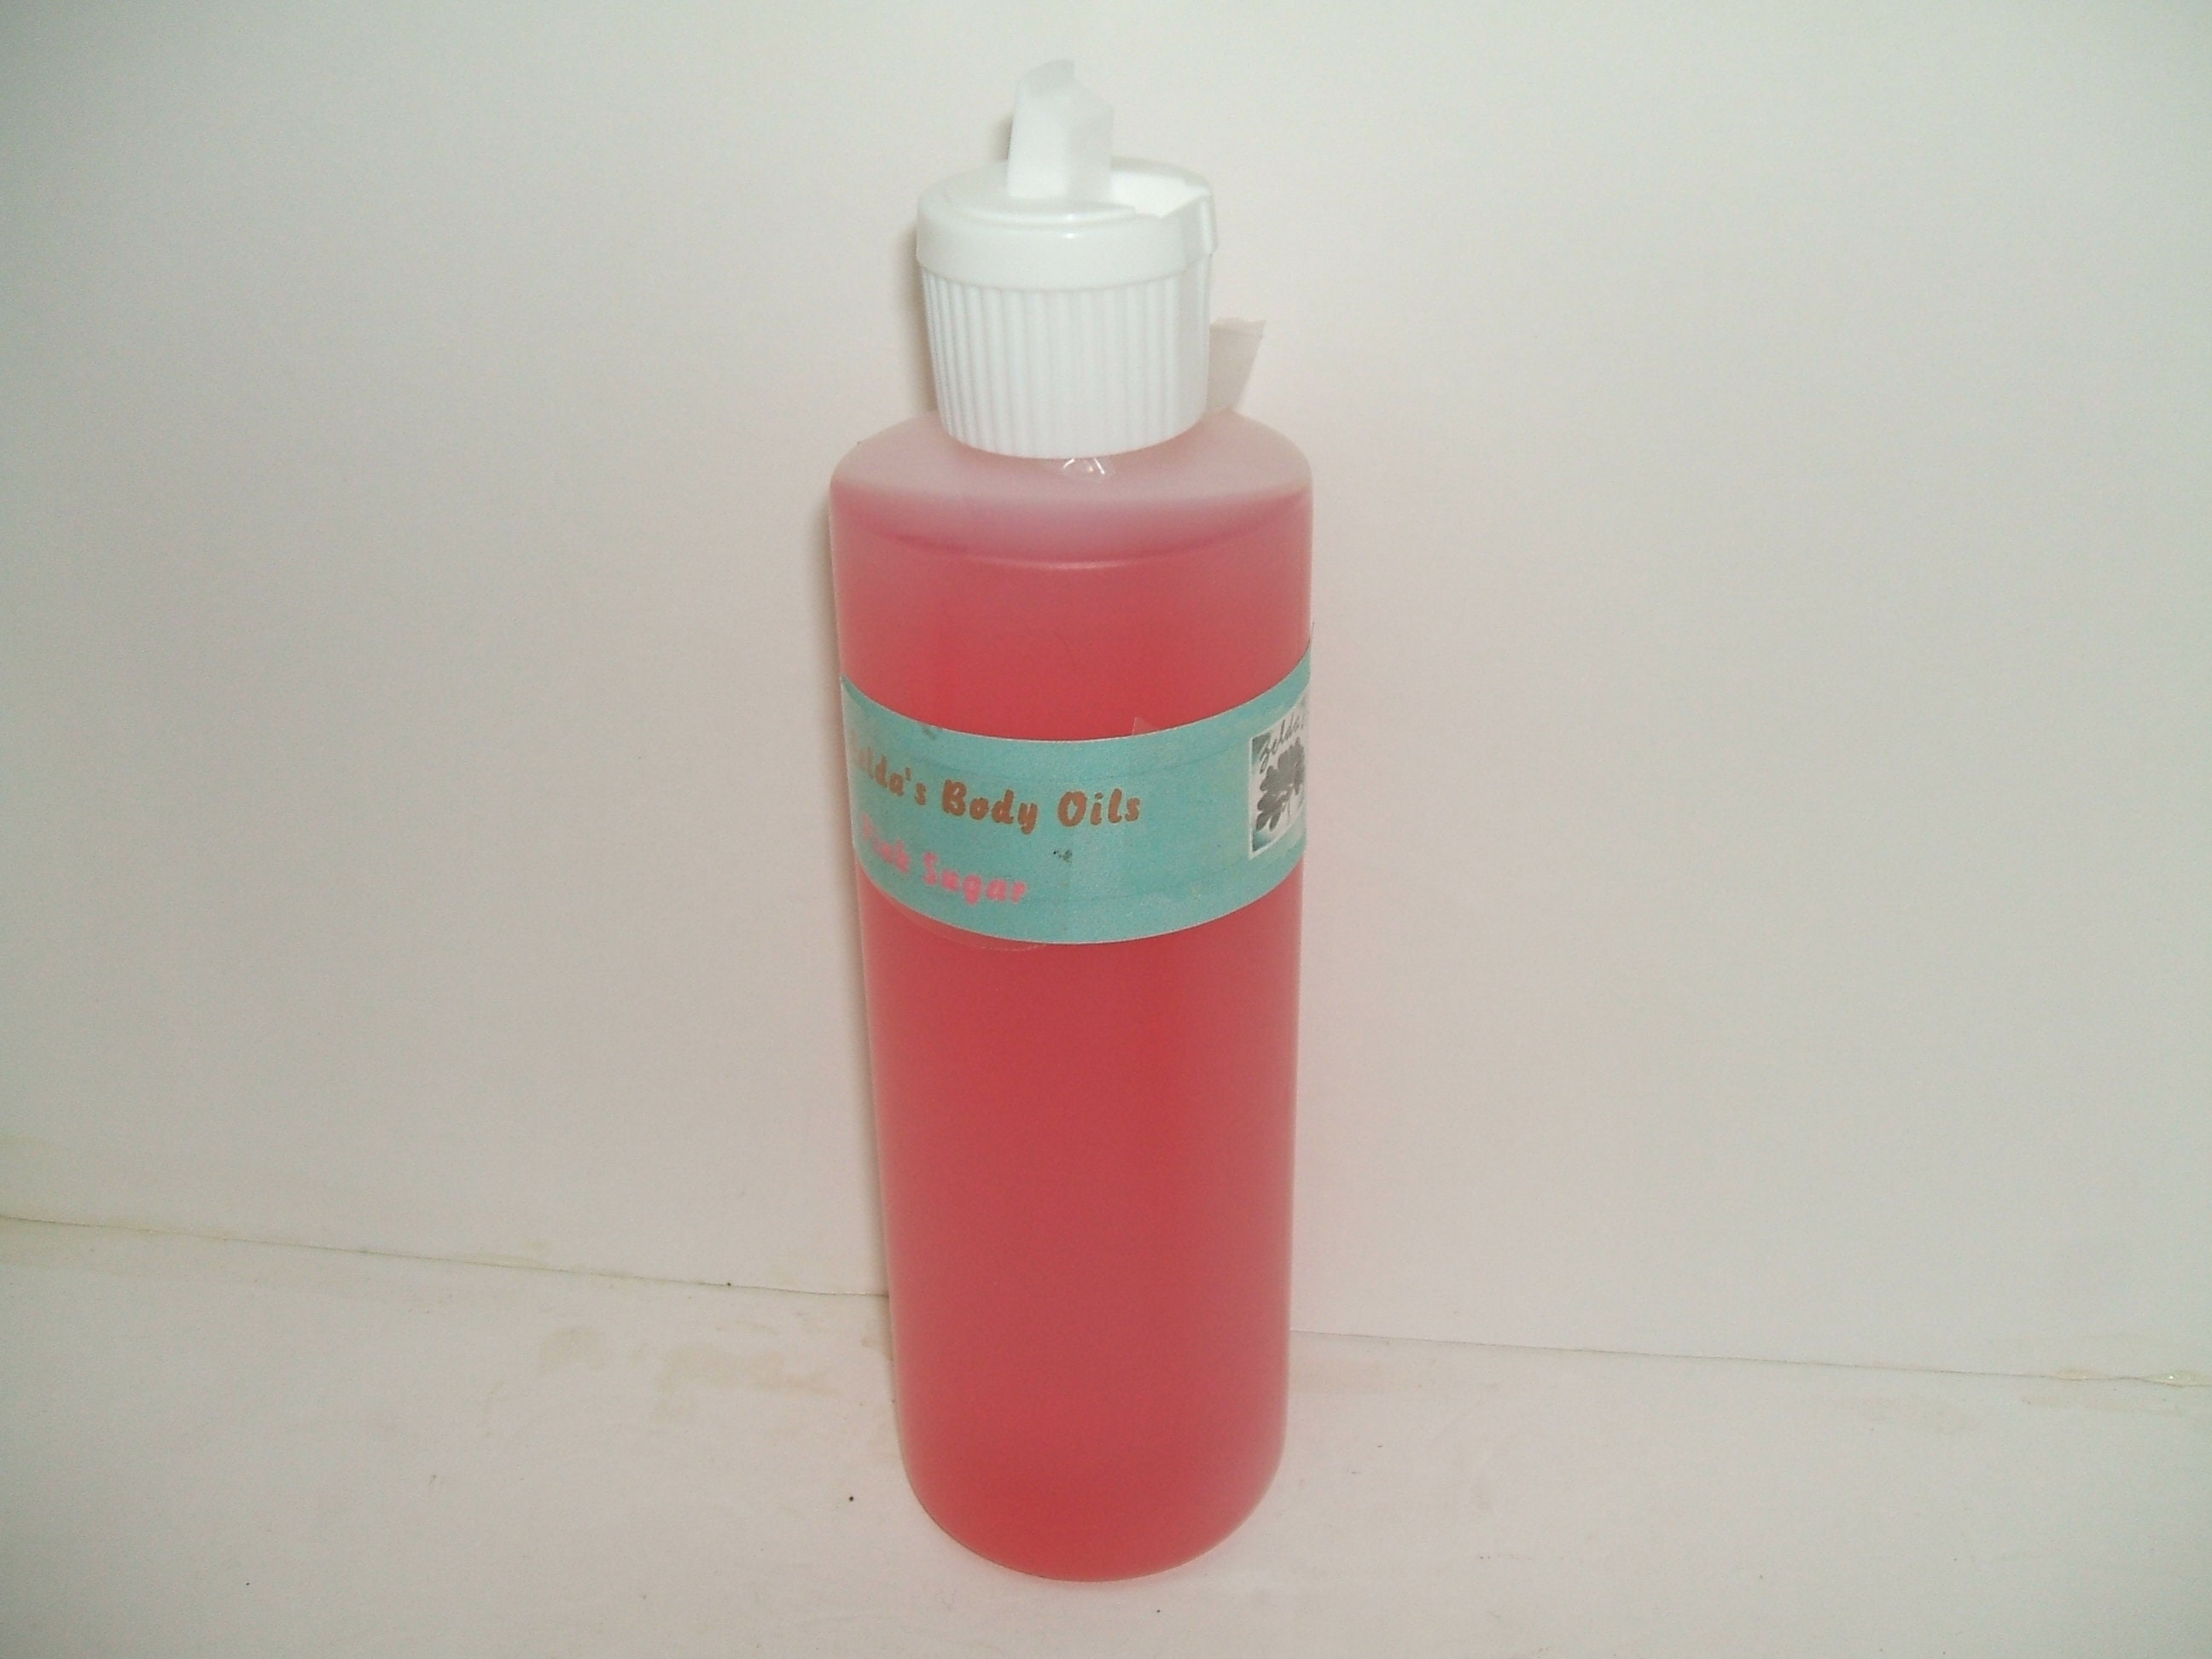 African Musk Type 16 oz Body Oil New Version – Merch-a-Mart Wholesale